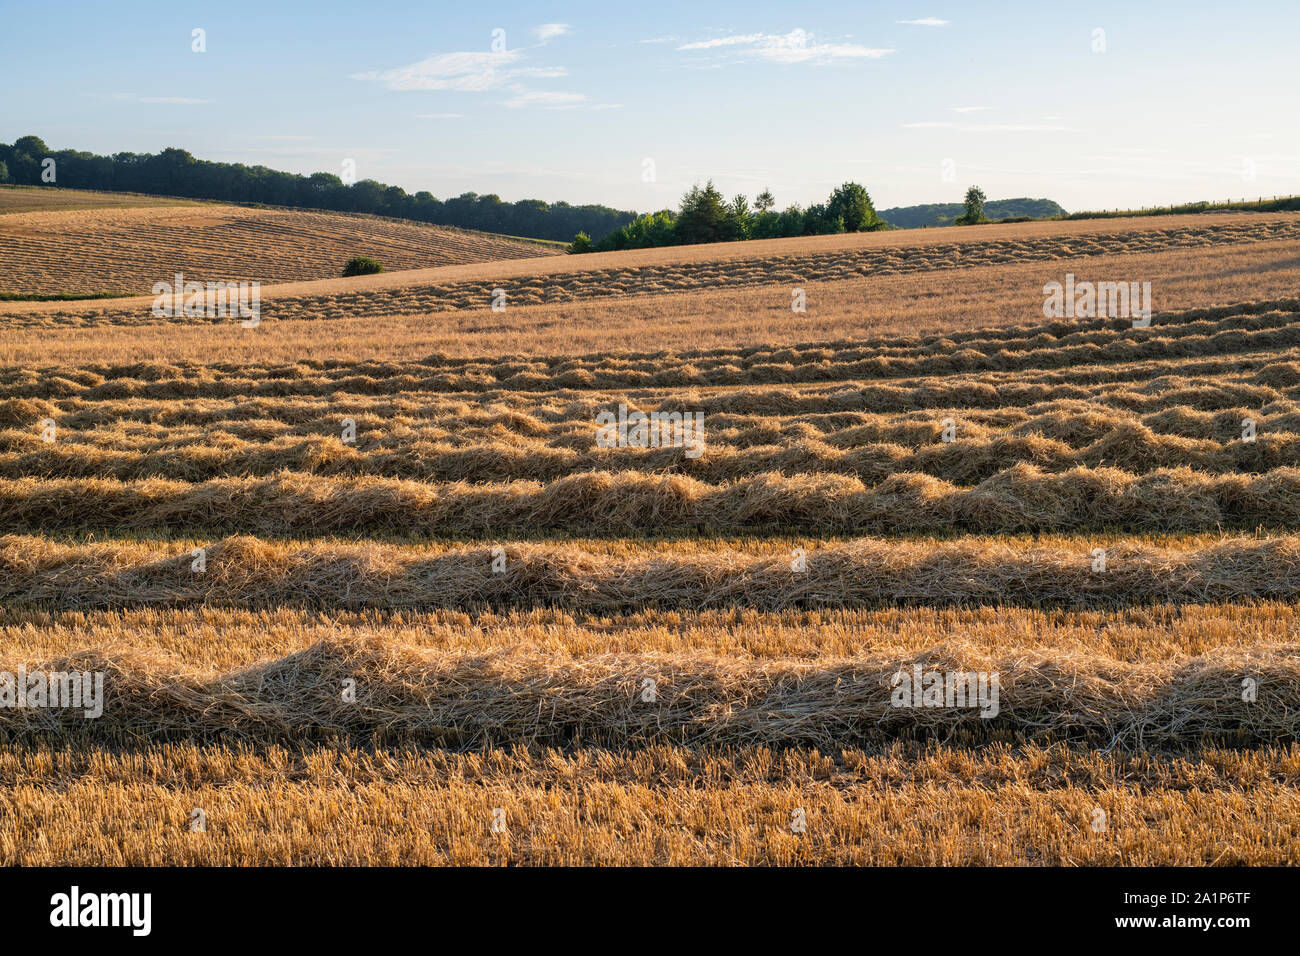 Cut barley fields in the English countryside. Near Snowshill, Cotswolds, Gloucestershire, England Stock Photo